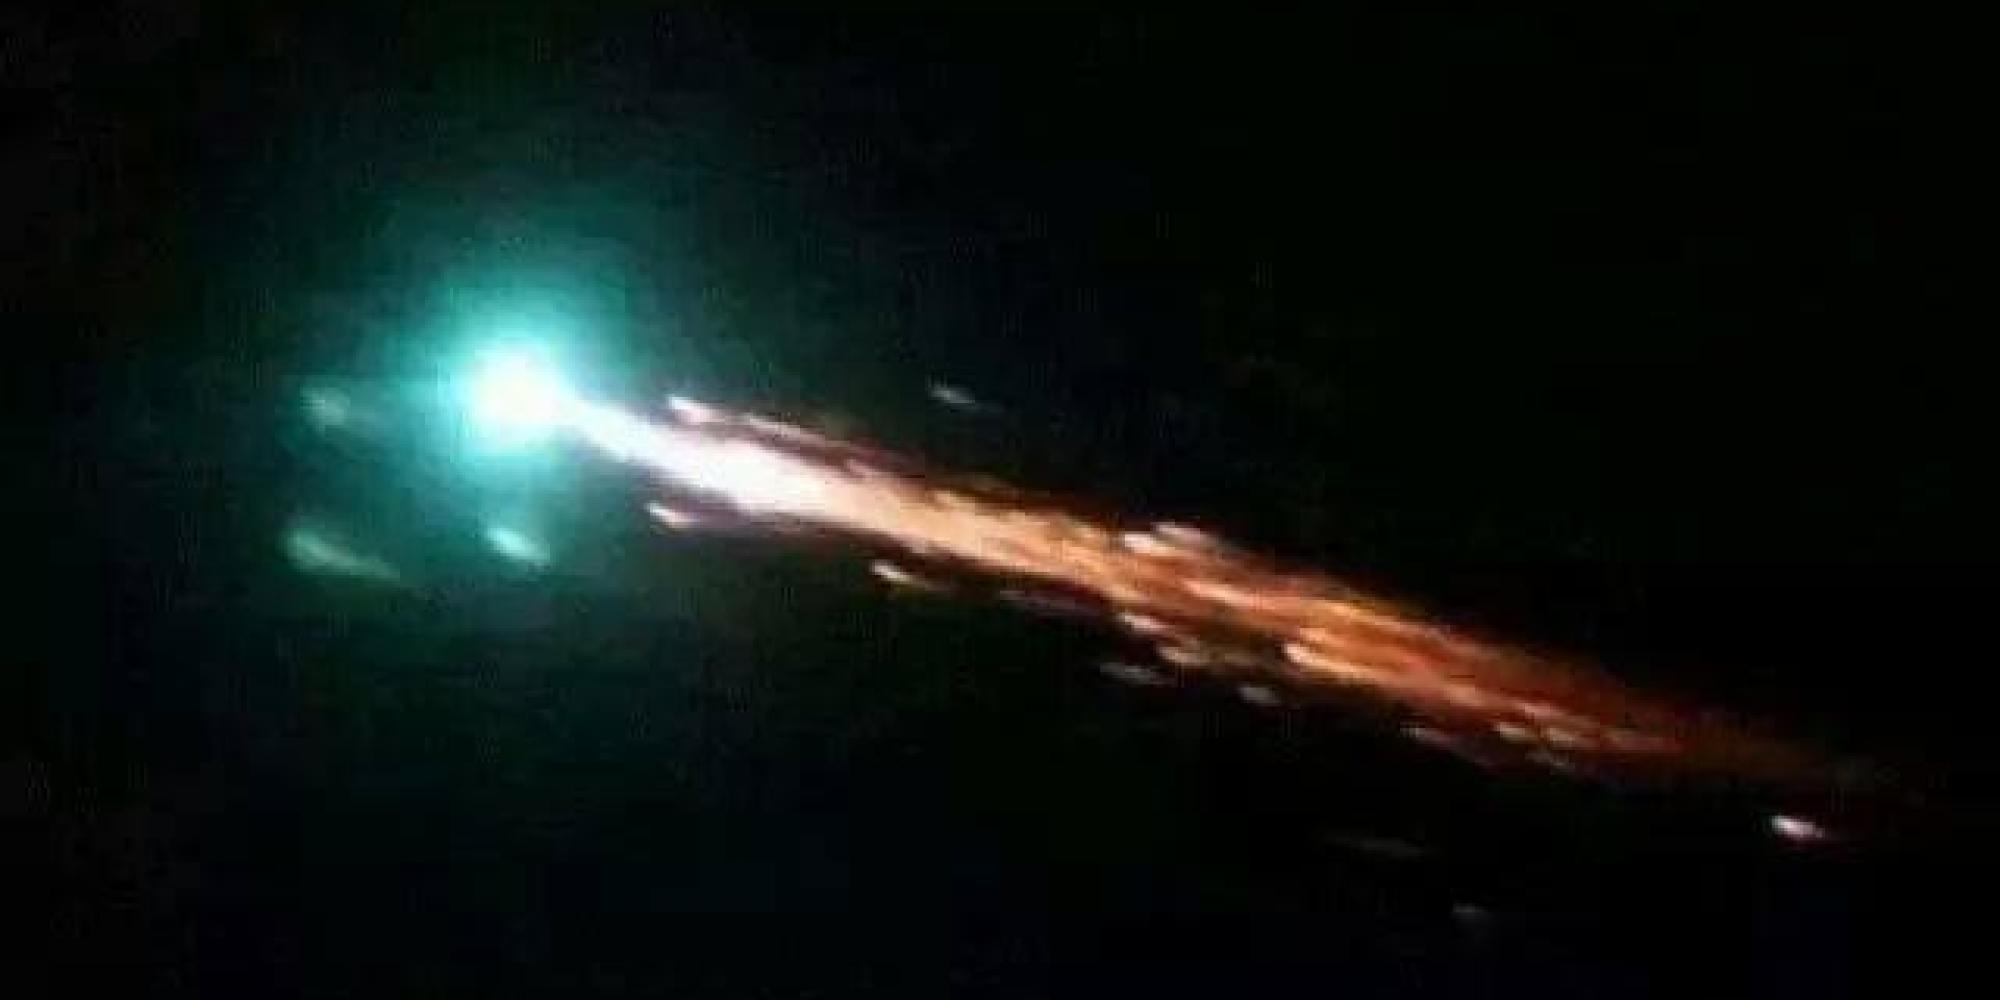 Meteor Strike Over Texas Creates Green Ball Of Fire, Ground Shakes